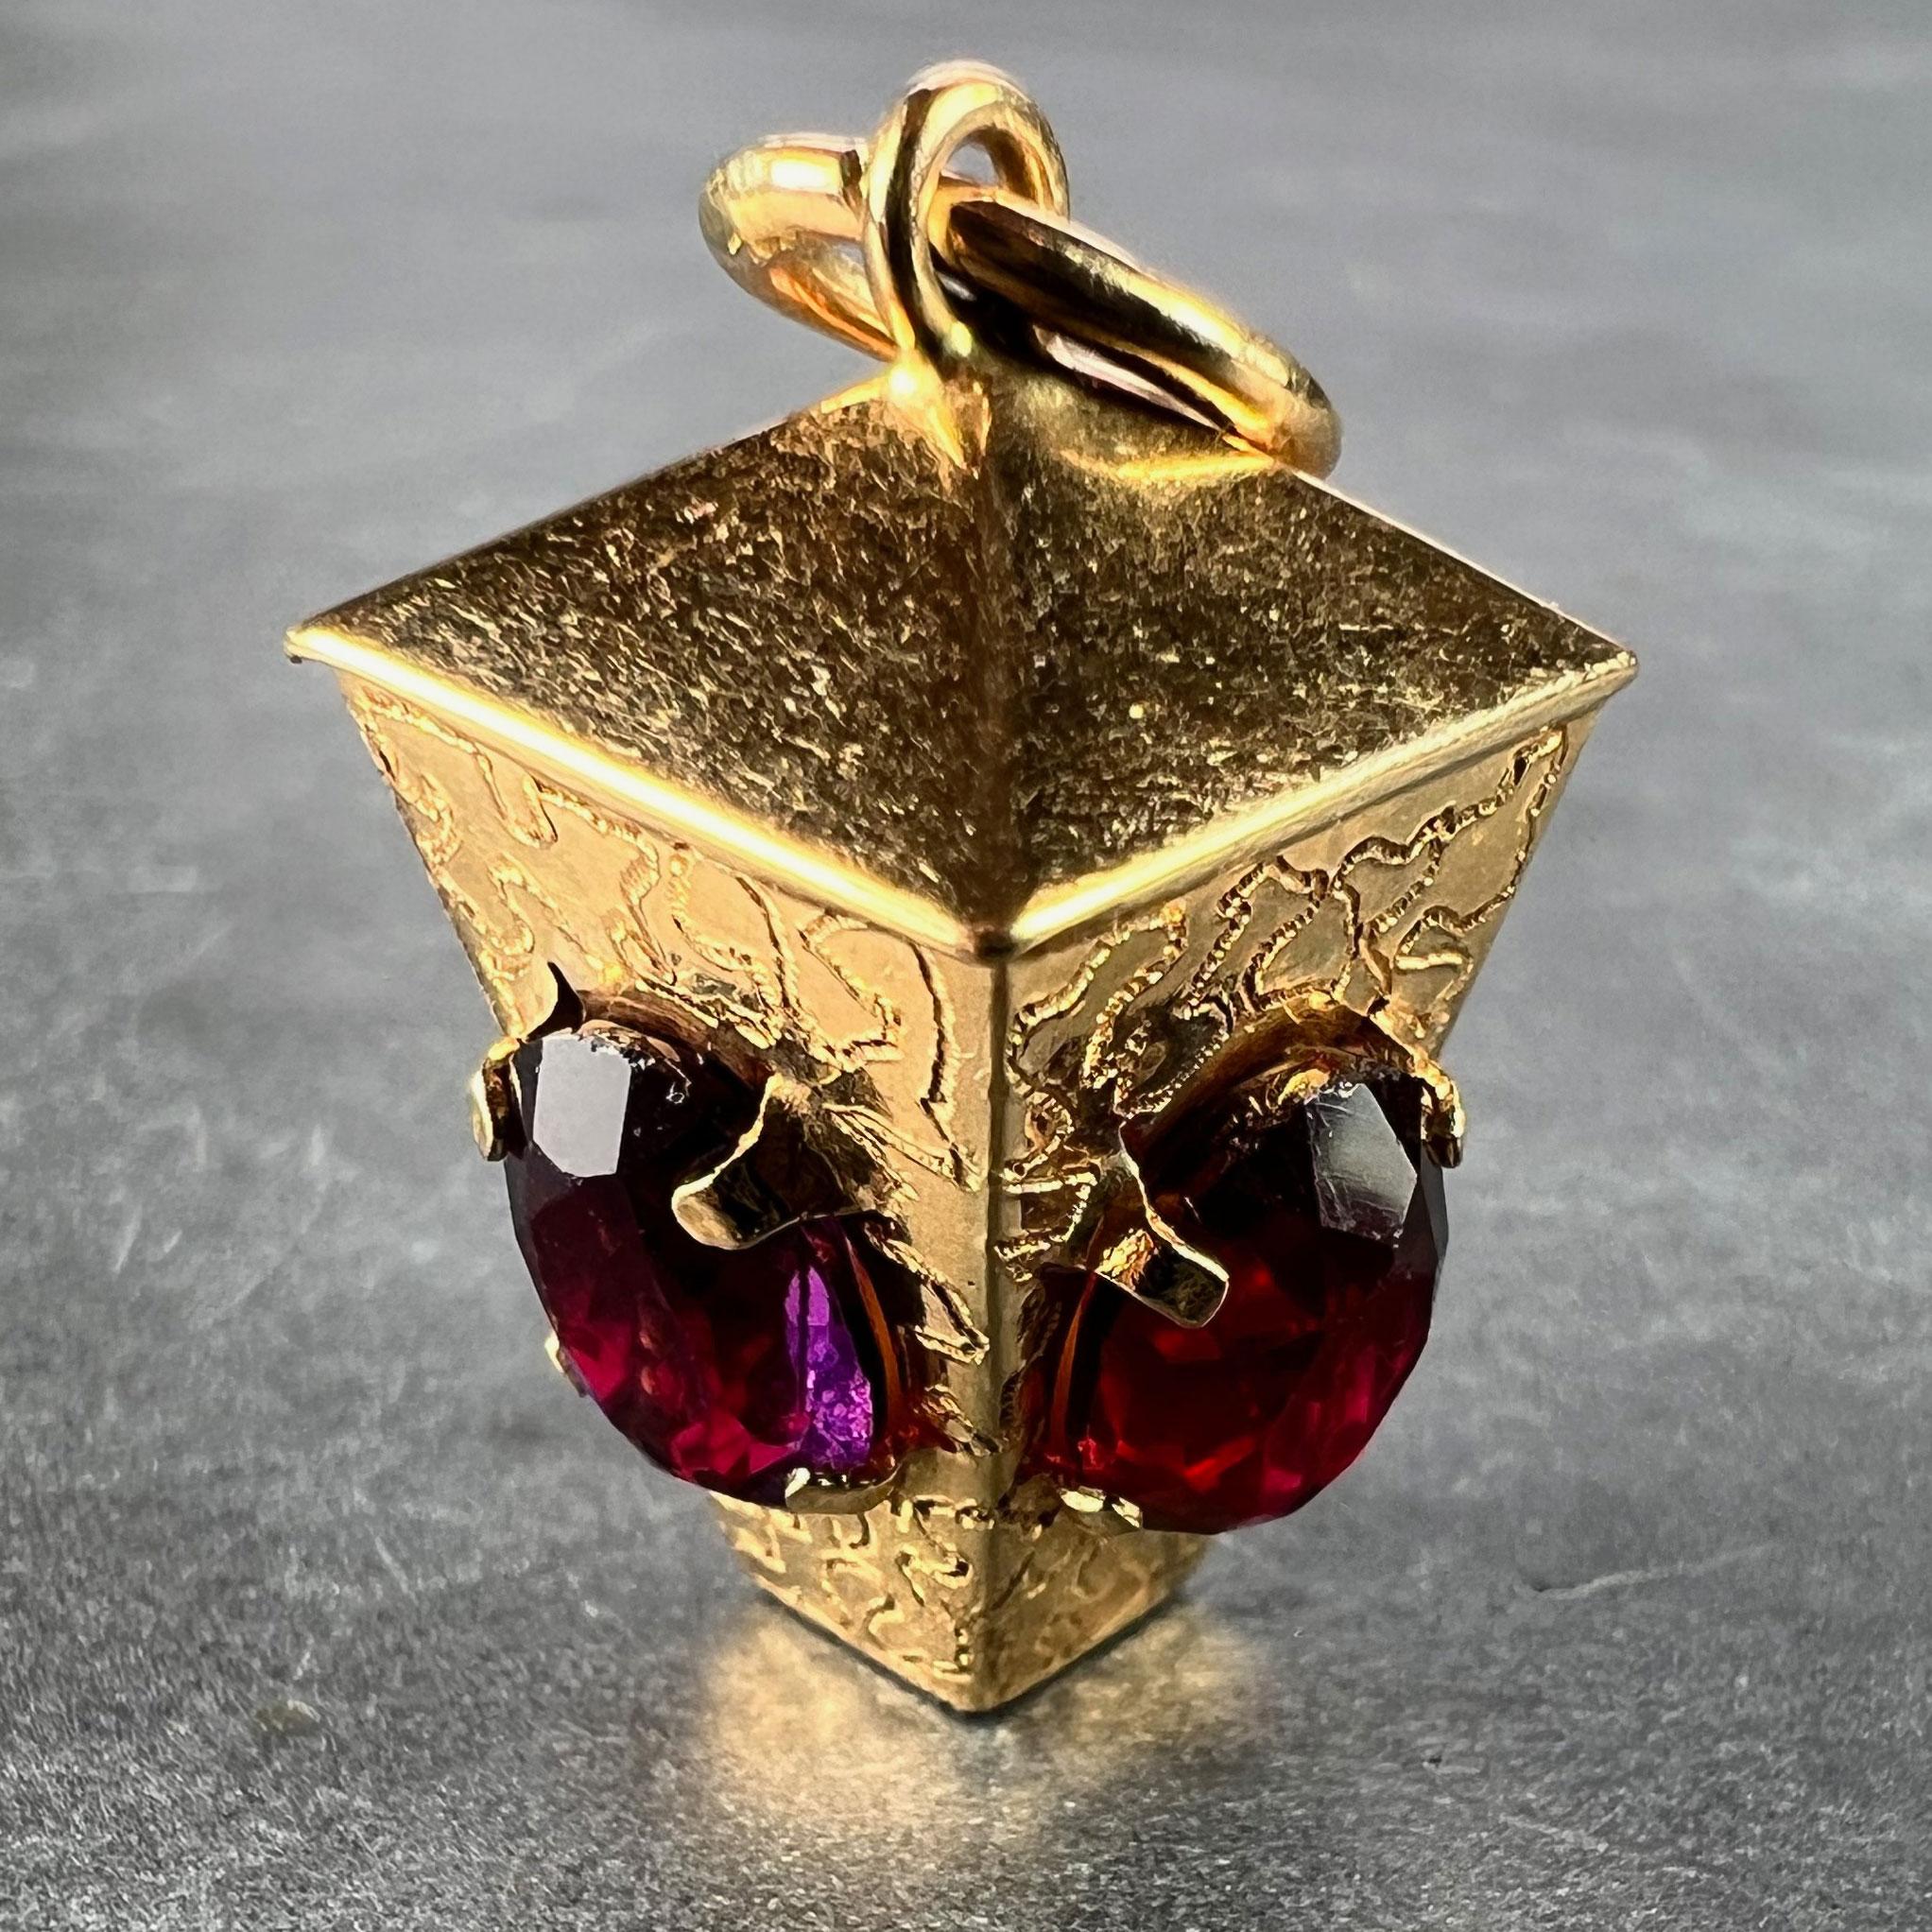 An Italian 18 karat (18K) yellow gold charm pendant designed as a square lantern with red and purple paste glass gems to the sides. Stamped to the jump ring with 750 for 18 karat gold and 31VA for Italian manufacture. 

Dimensions: 2.3 x 1.5 x 1.5